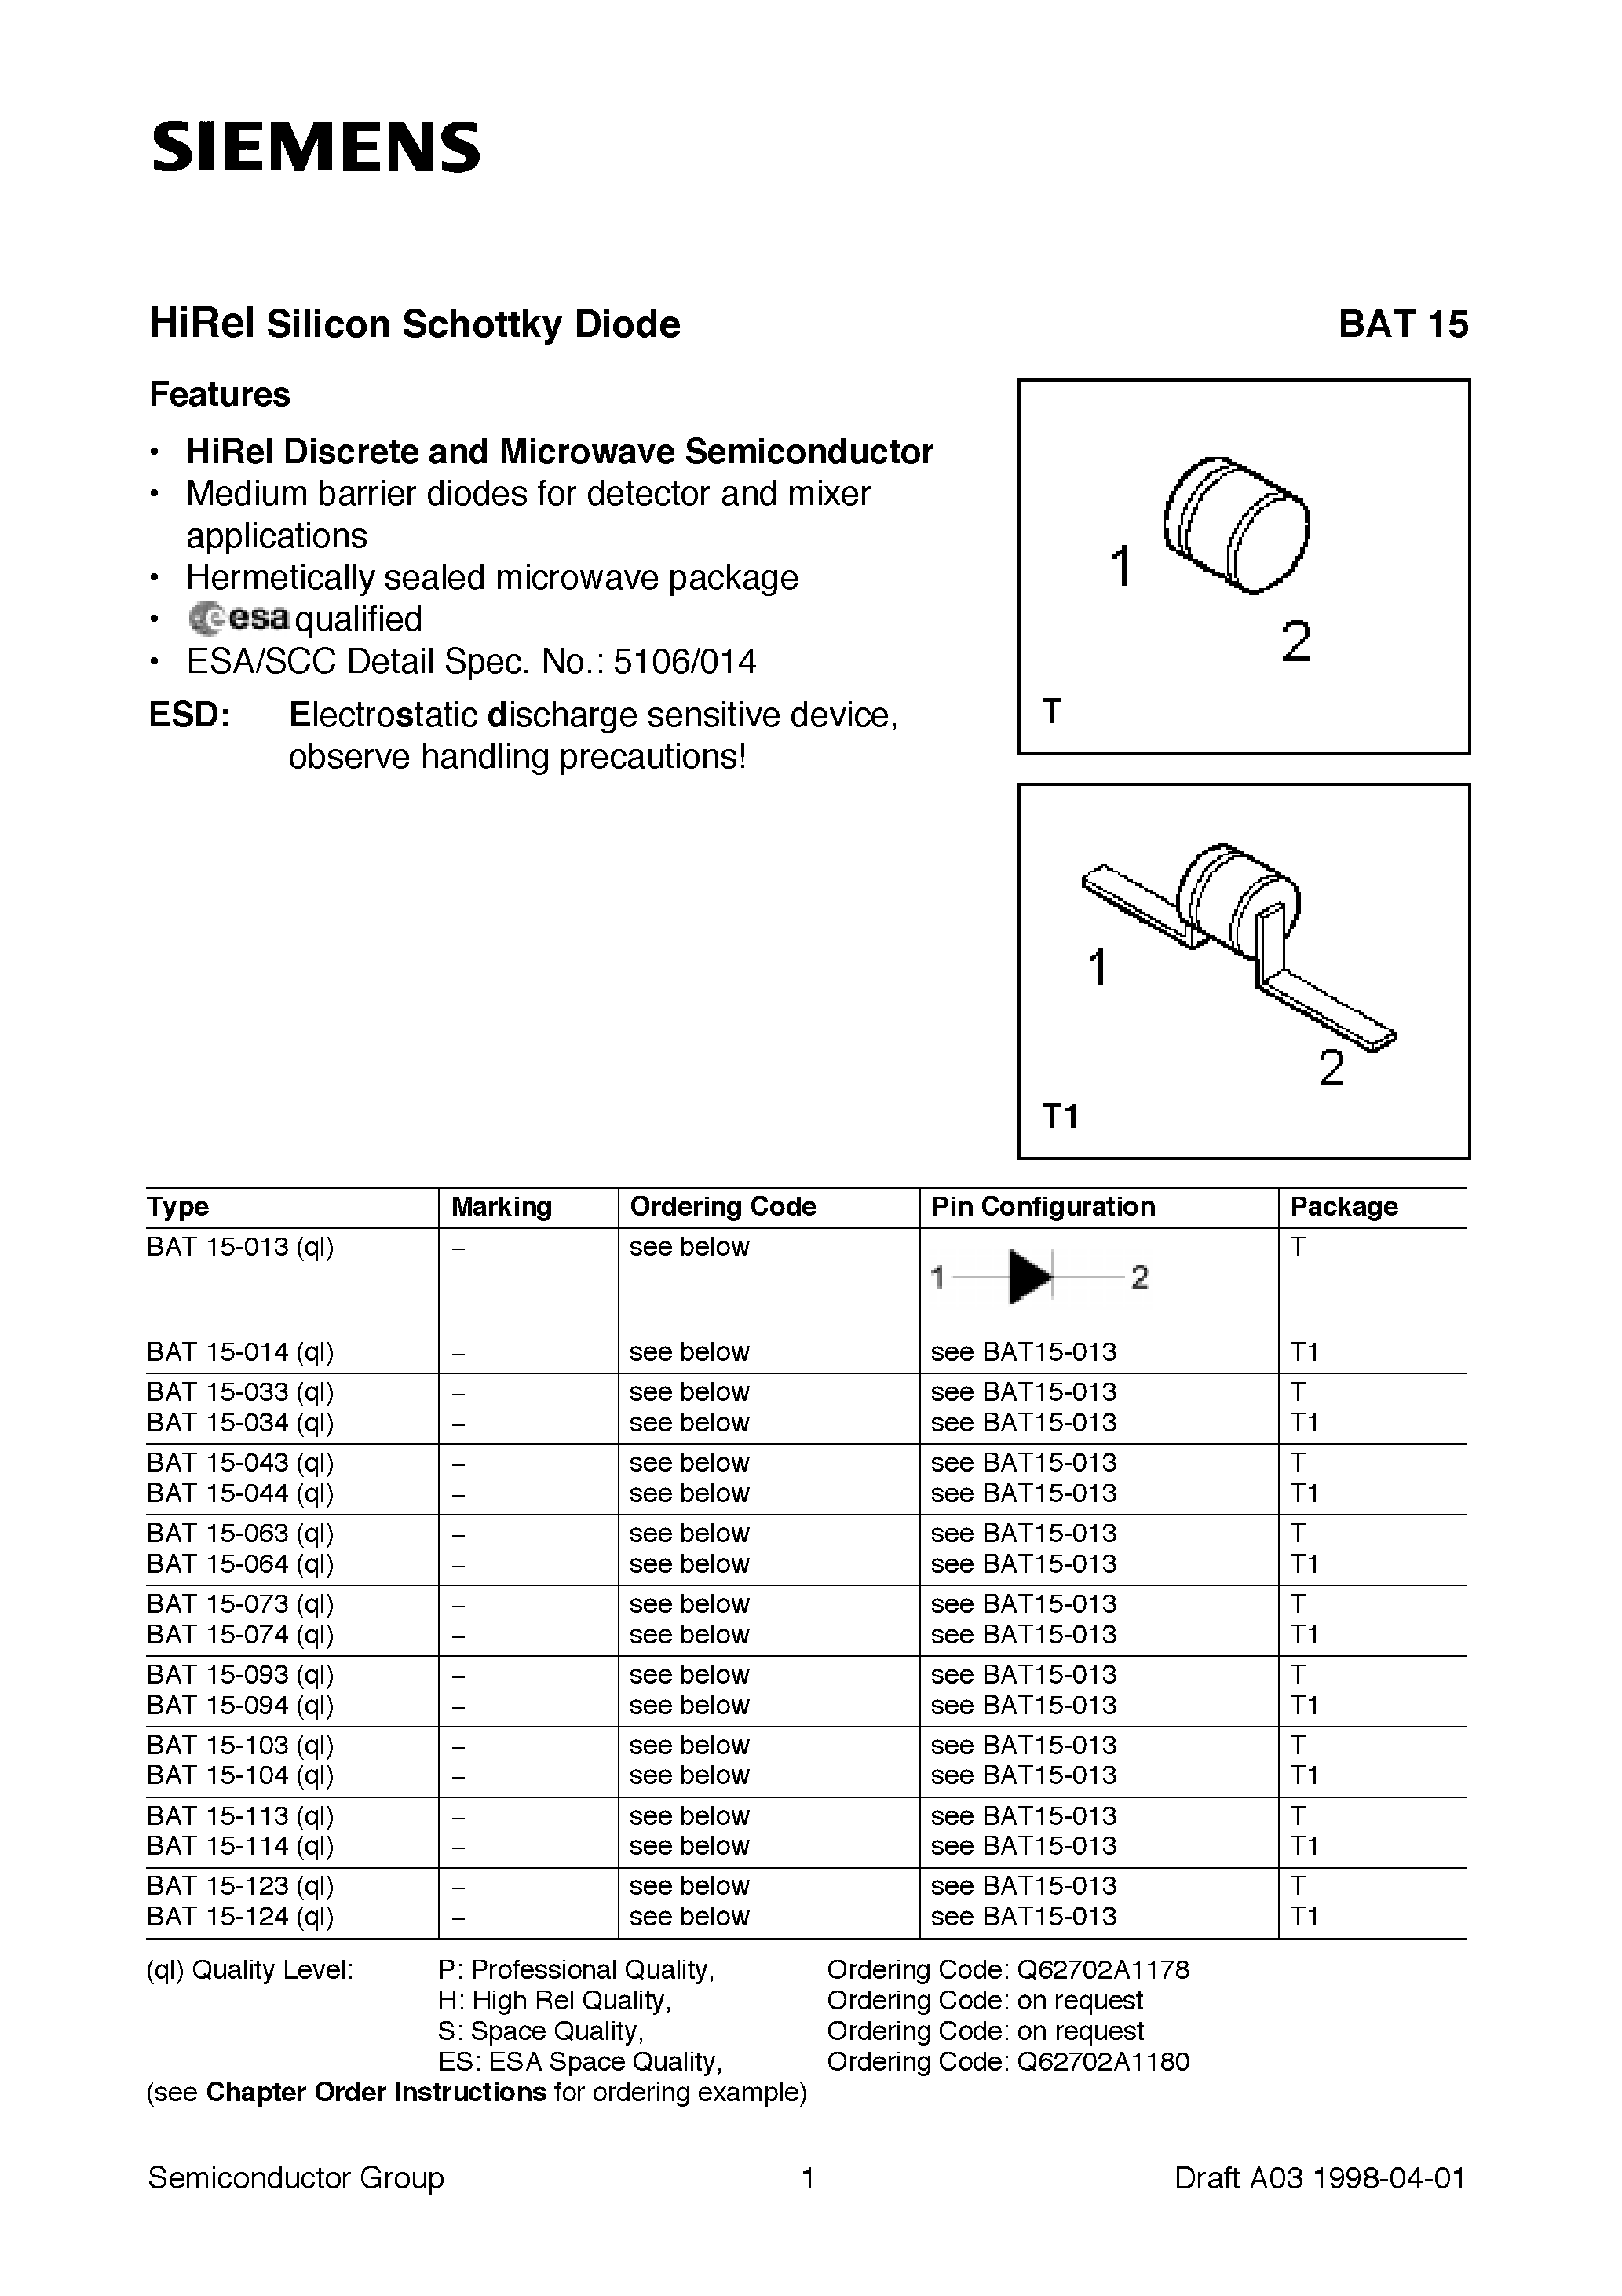 Datasheet BAT15-094 - HiRel Silicon Schottky Diode (HiRel Discrete and Microwave Semiconductor Medium barrier diodes for detector and mixer applications) page 1